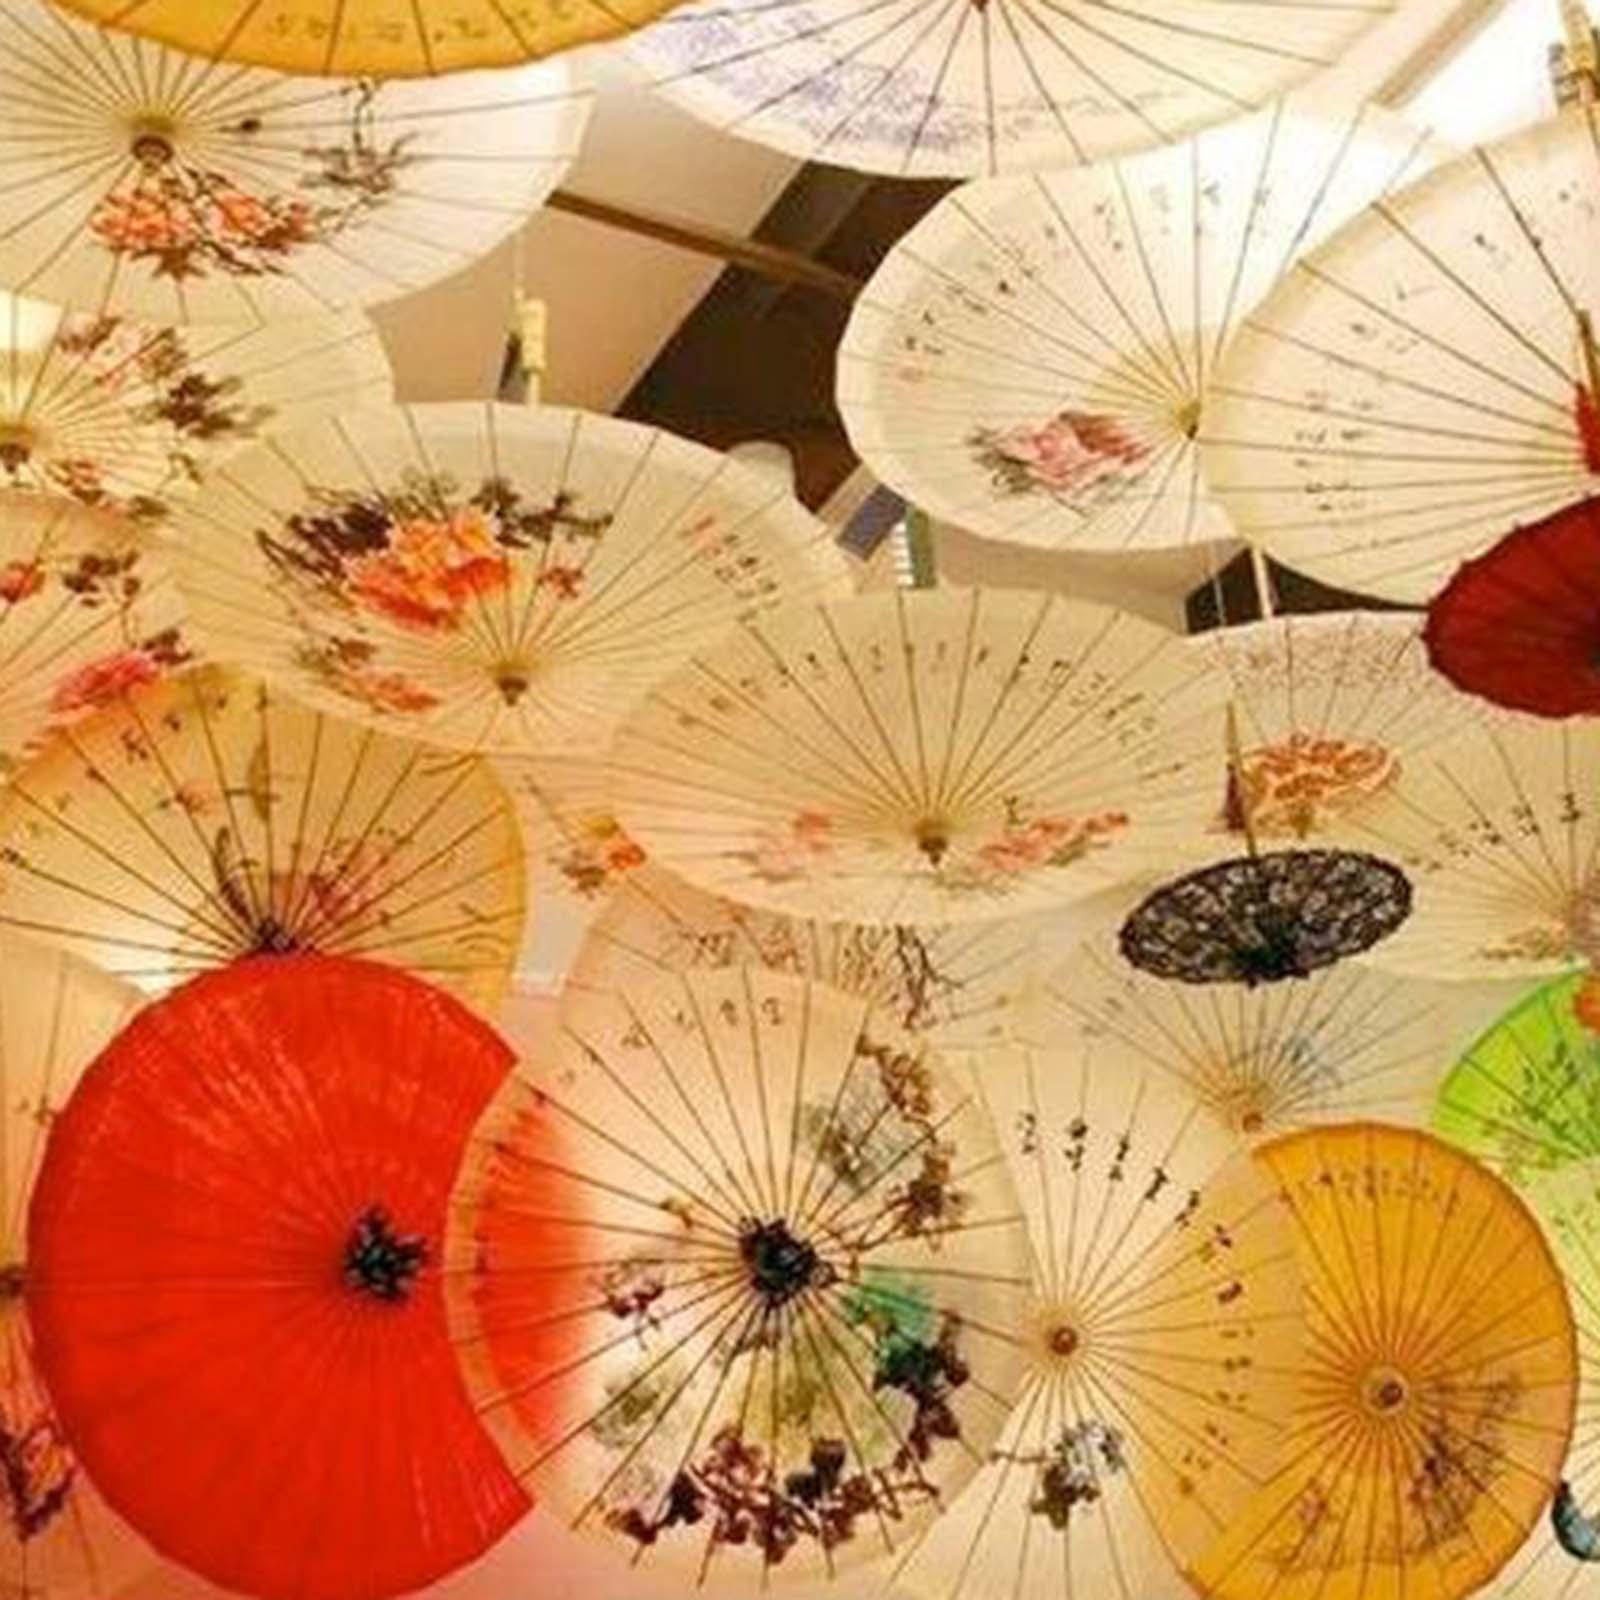 Chinese Oiled Paper Umbrella Dancing Props for Wedding Dance Recitals Events Style A